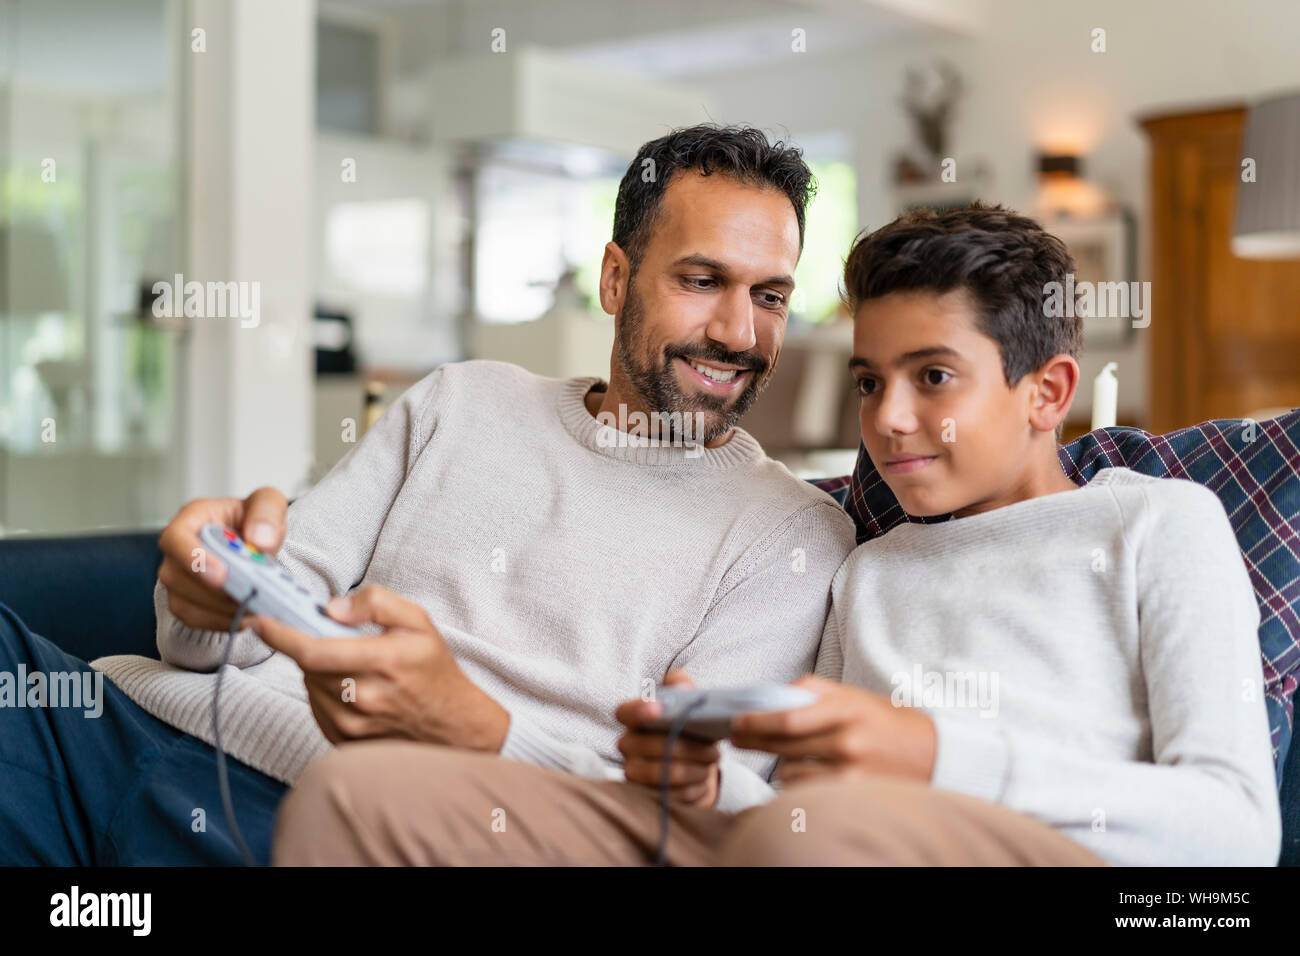 Happy father and son playing video game on couch in living room Stock Photo